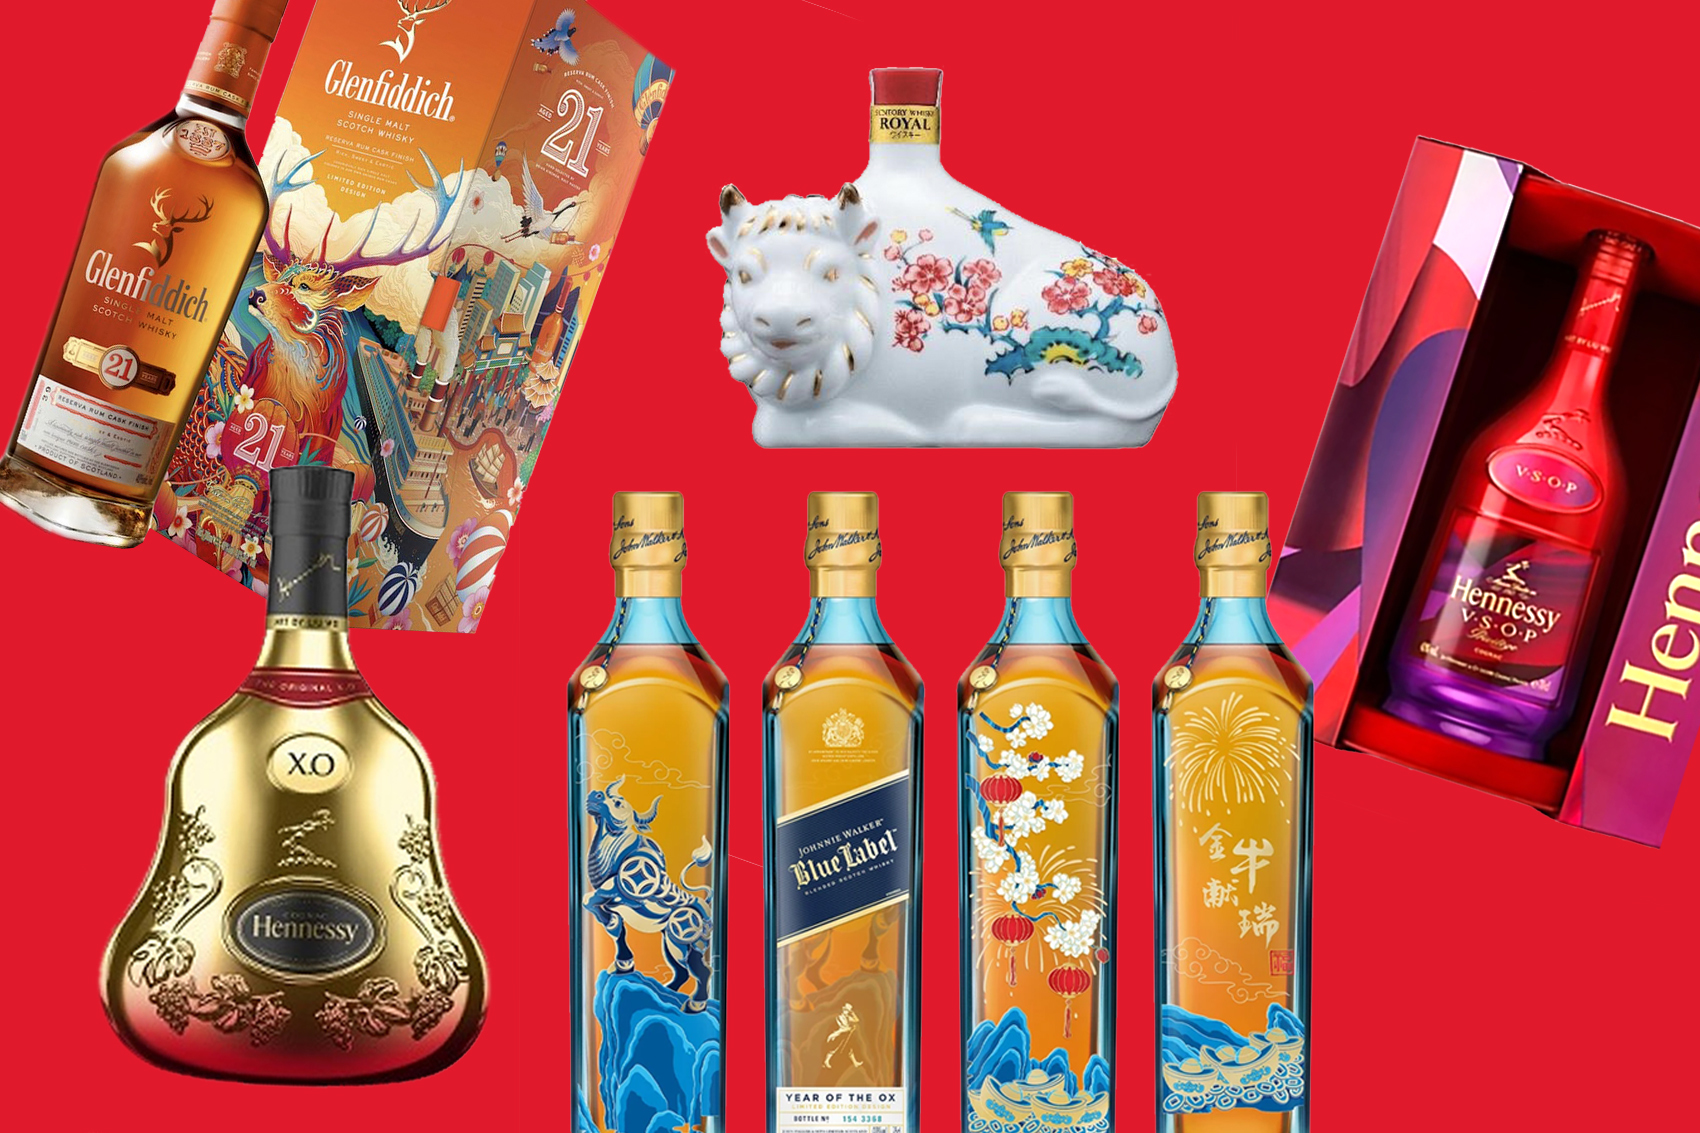 Limitededition spirits to celebrate Chinese New Year 2021